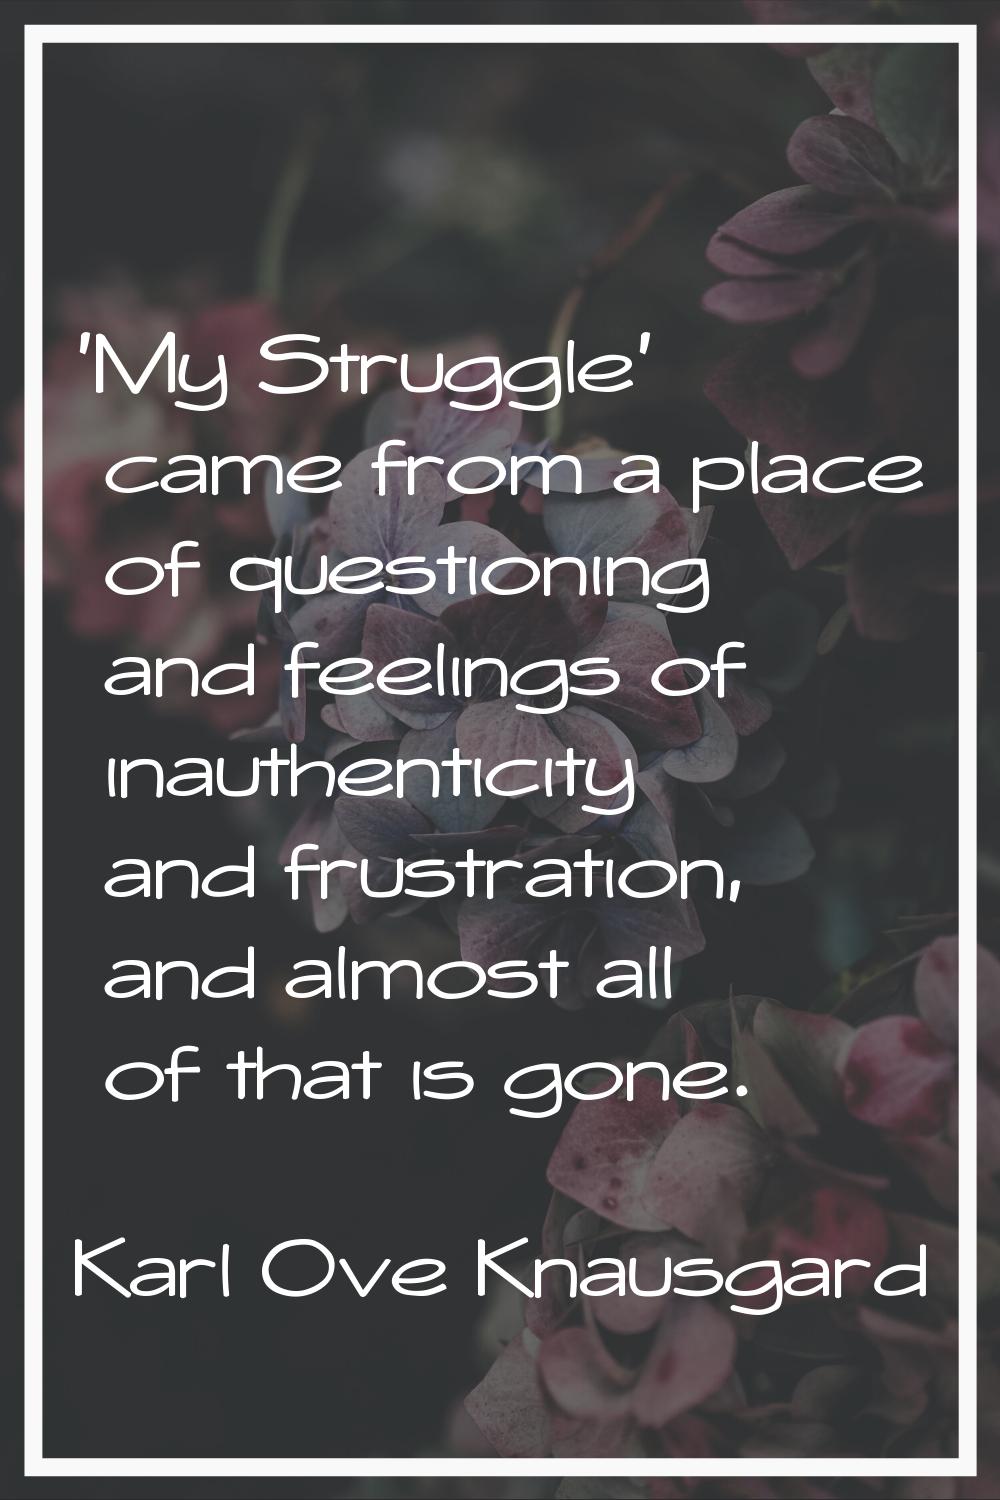 'My Struggle' came from a place of questioning and feelings of inauthenticity and frustration, and 